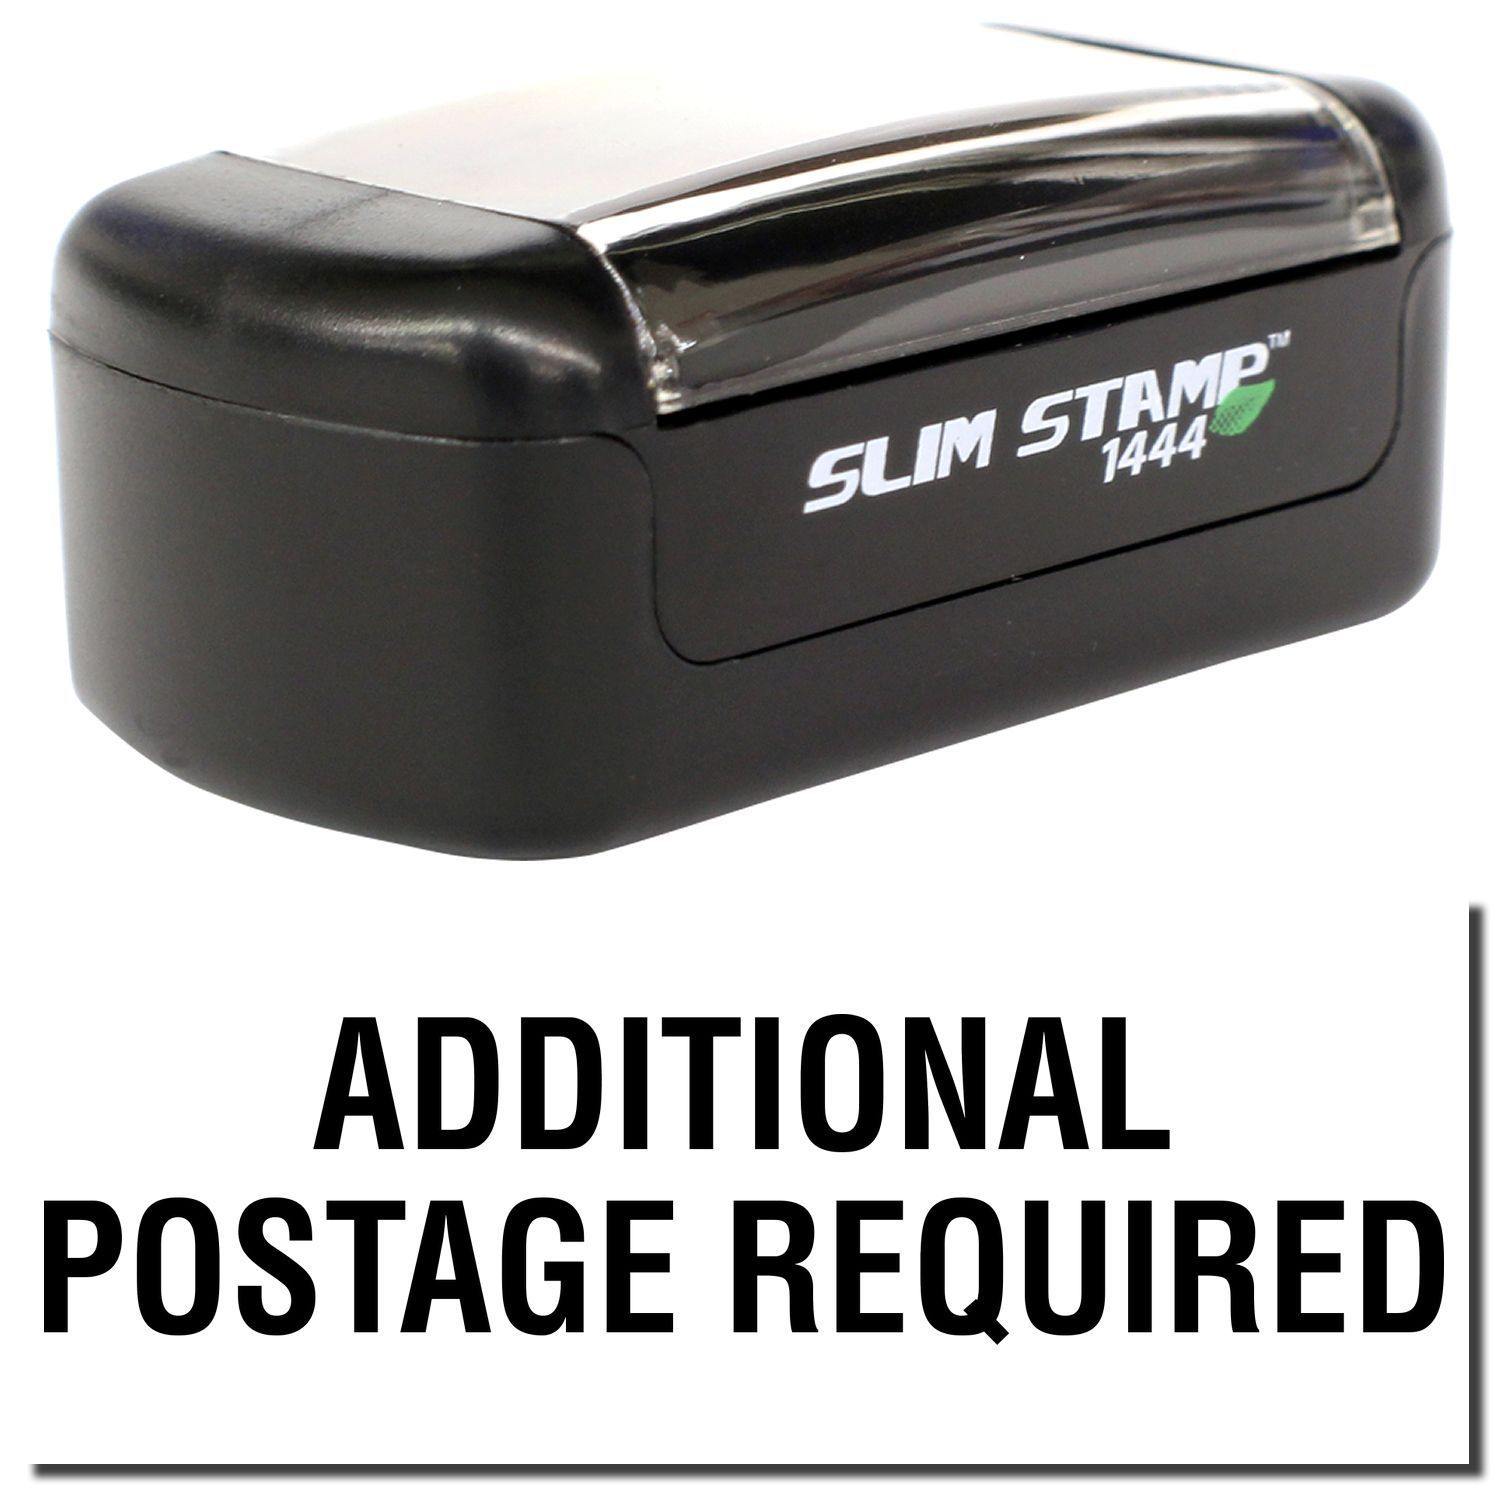 A stock office pre-inked stamp with a stamped image showing how the text "ADDITIONAL POSTAGE REQUIRED" is displayed after stamping.